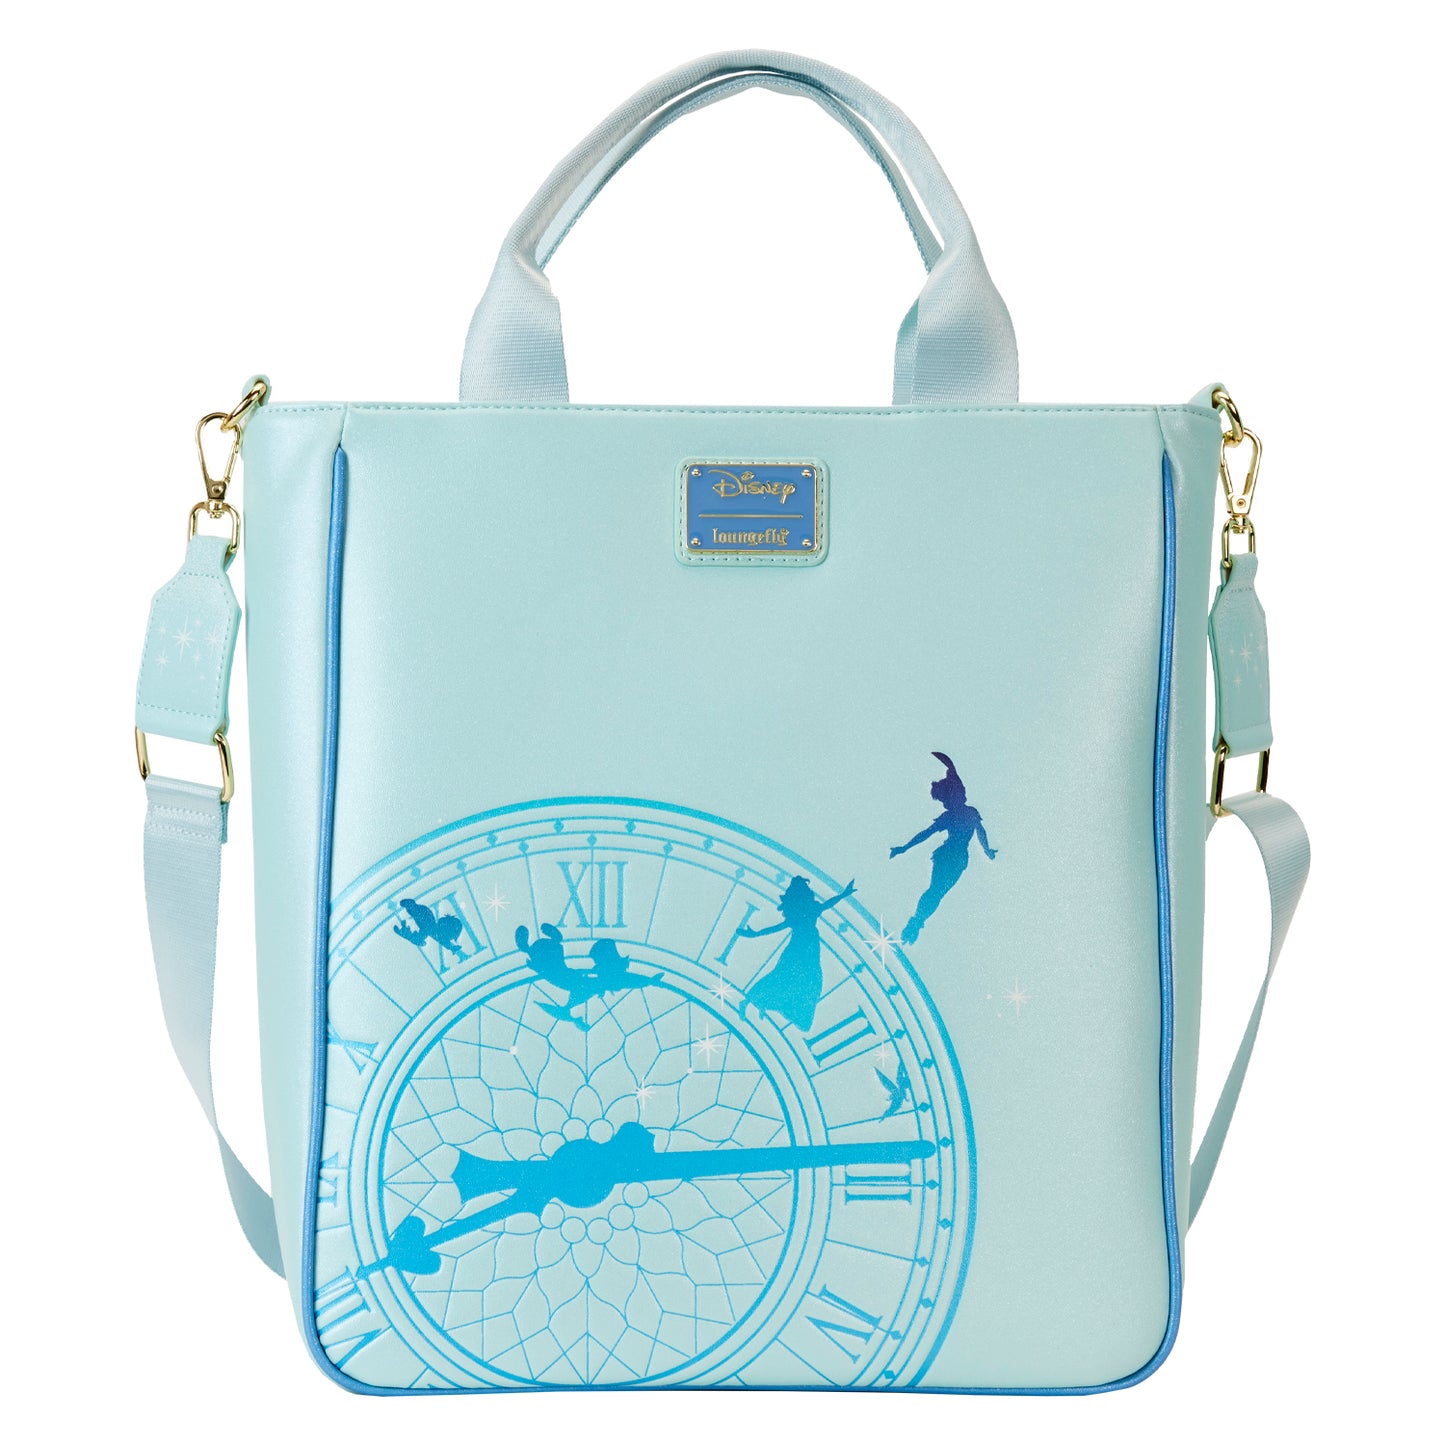 Peter Pan You Can Fly Glow Tote Bag With Coin Bag *PRE-ORDER ITEM*